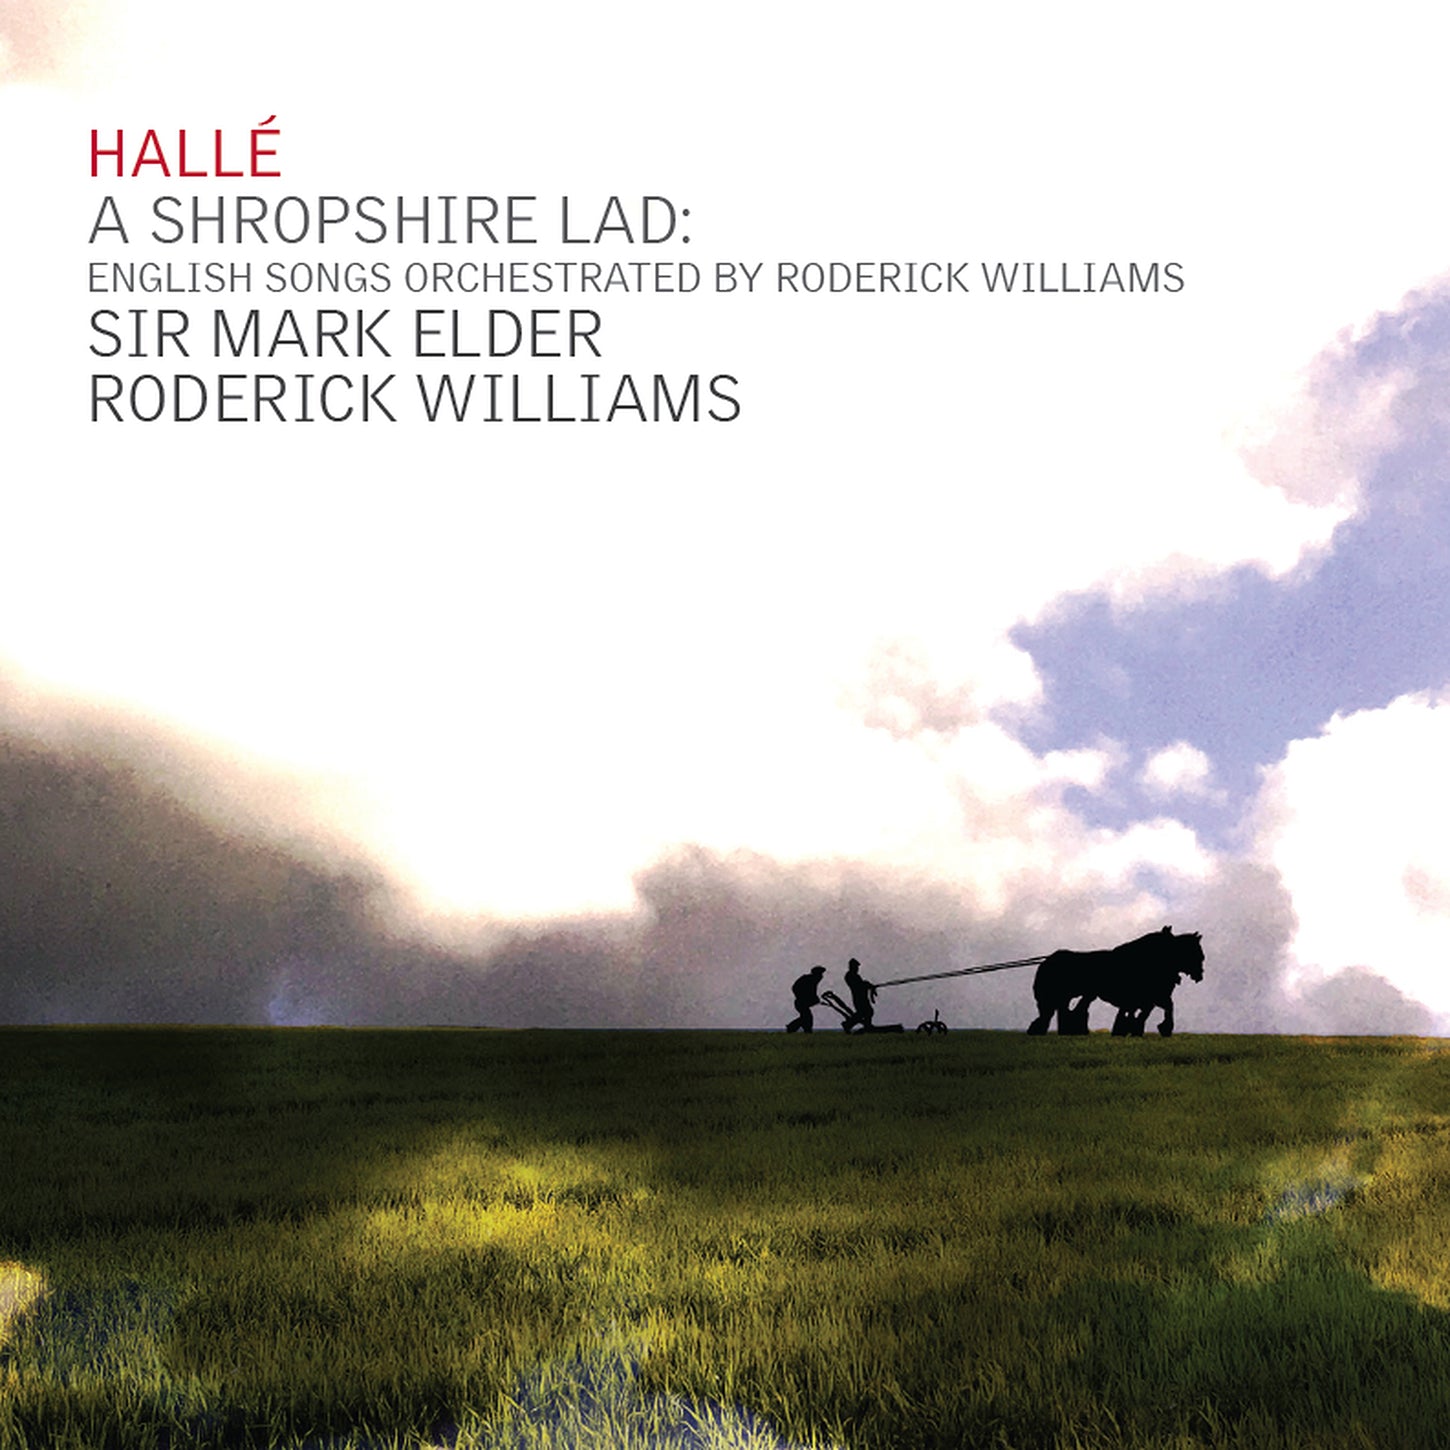 A Shropshire Lad: English Songs, Orchestrated / Elder, Williams